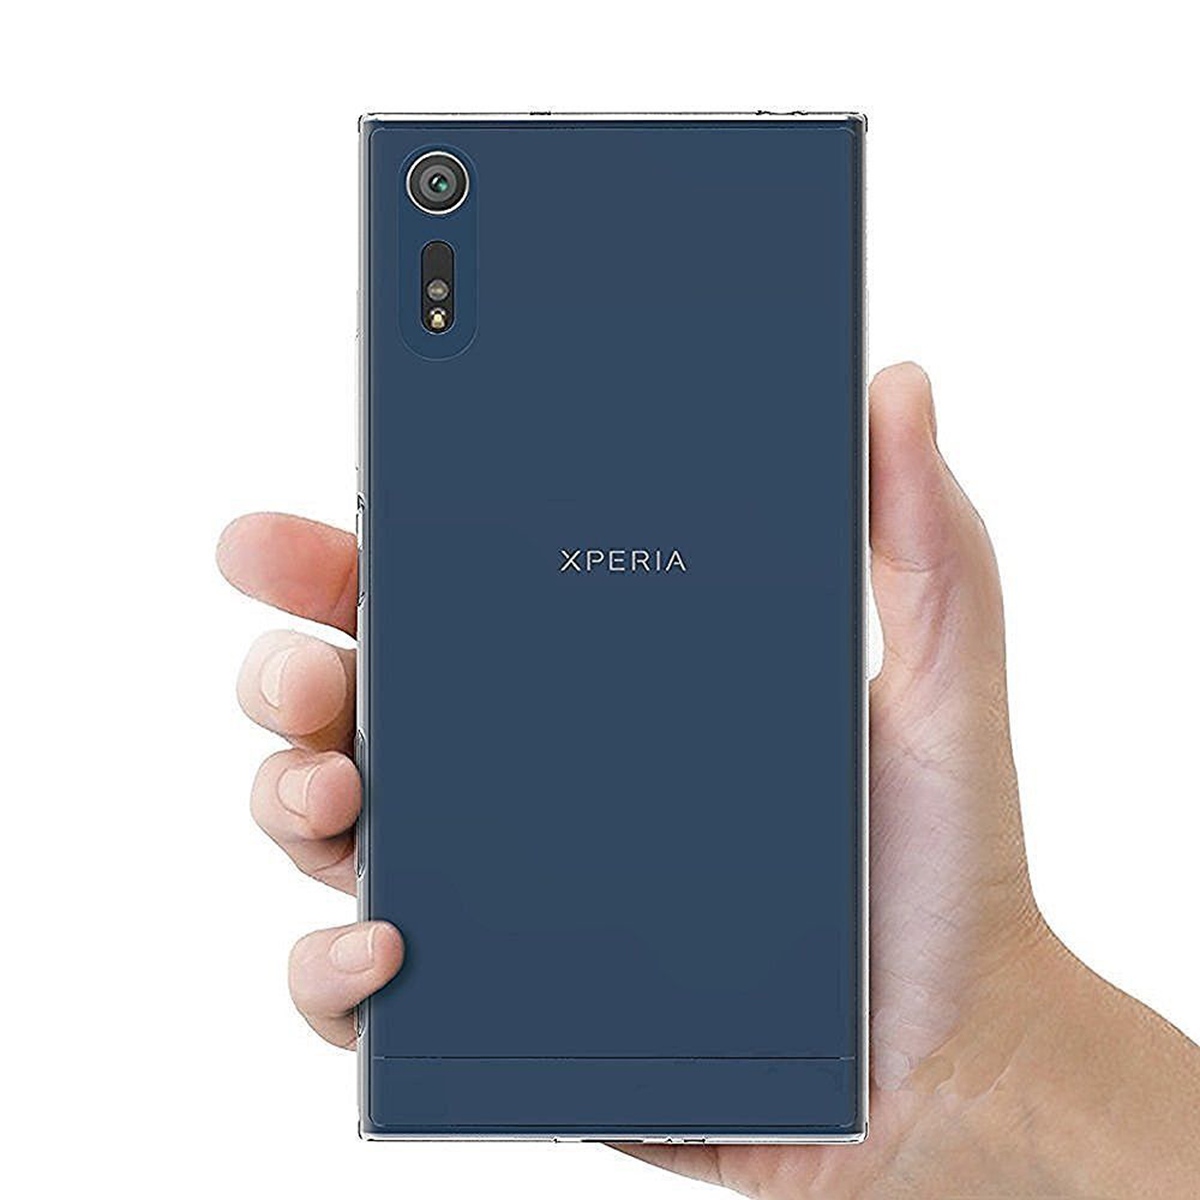 Transparent Crystal Clear TPU Soft Cover Case Skin for Sony Xperia XZ